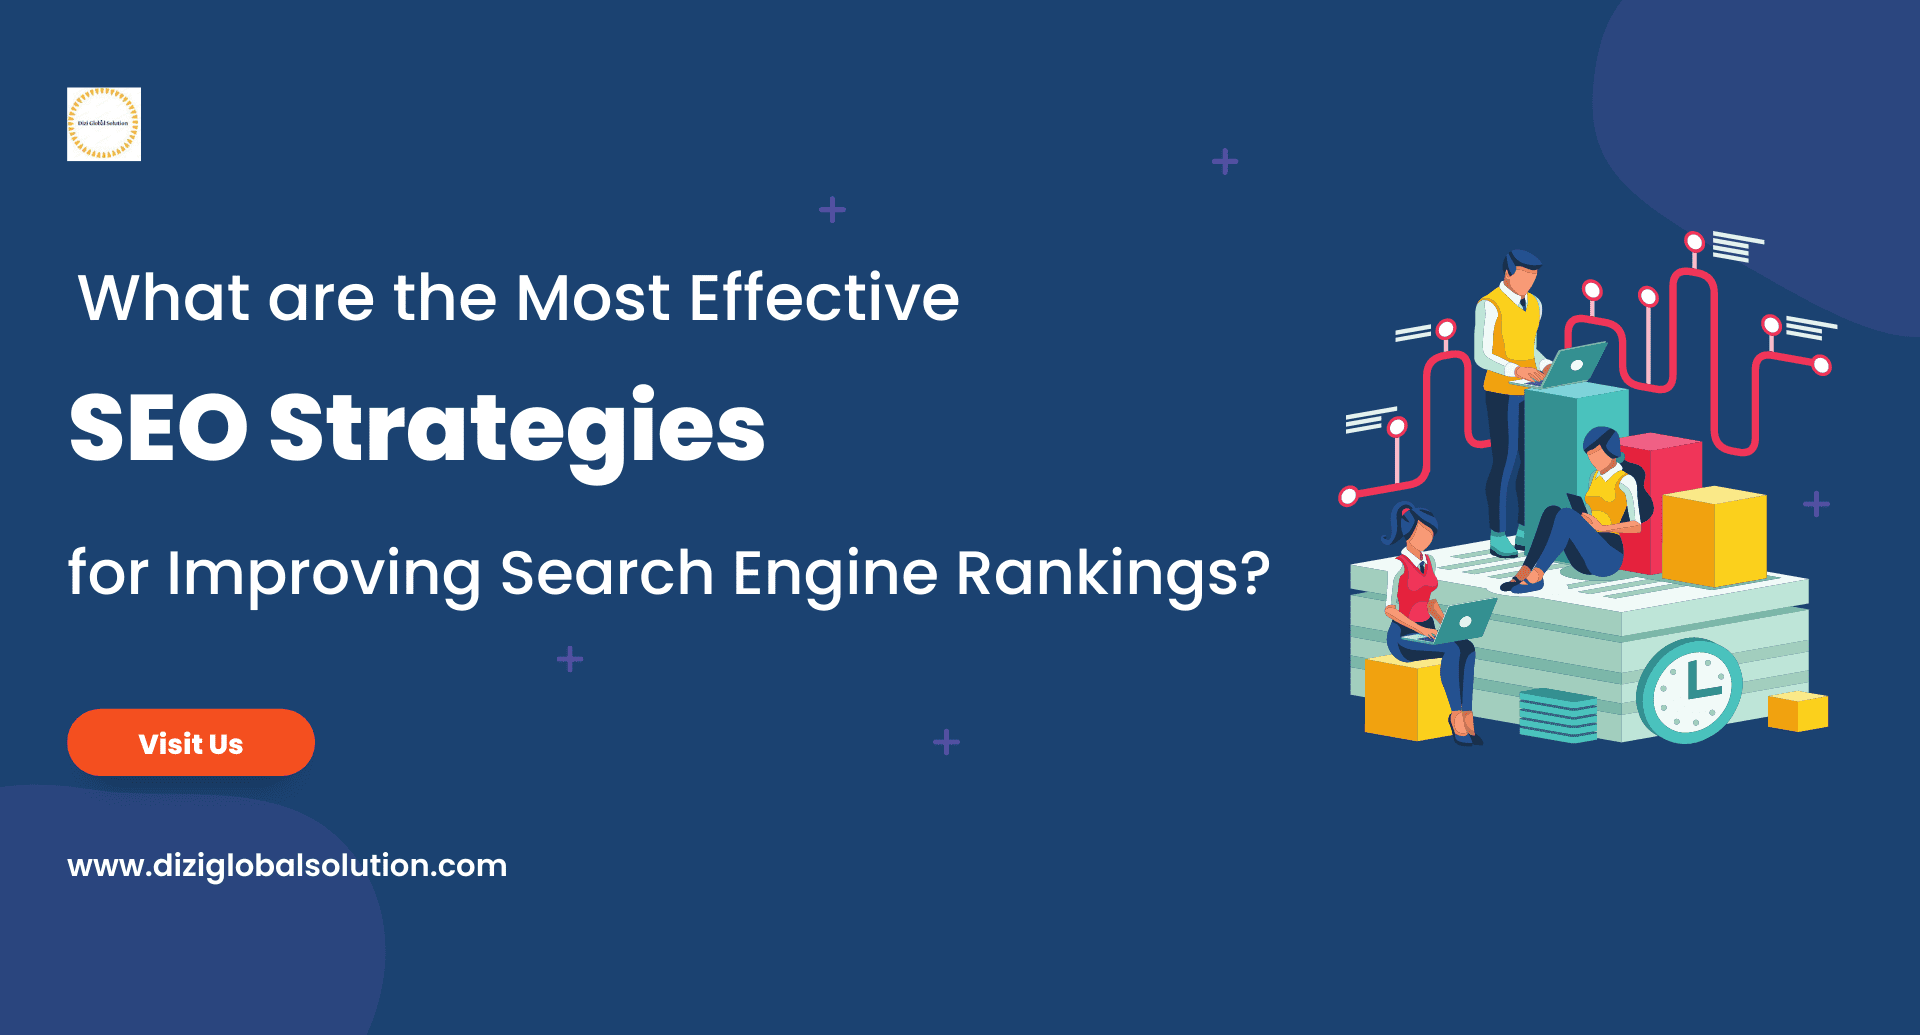 What are the Most Effective SEO Strategies for Improving Search Engine Rankings?